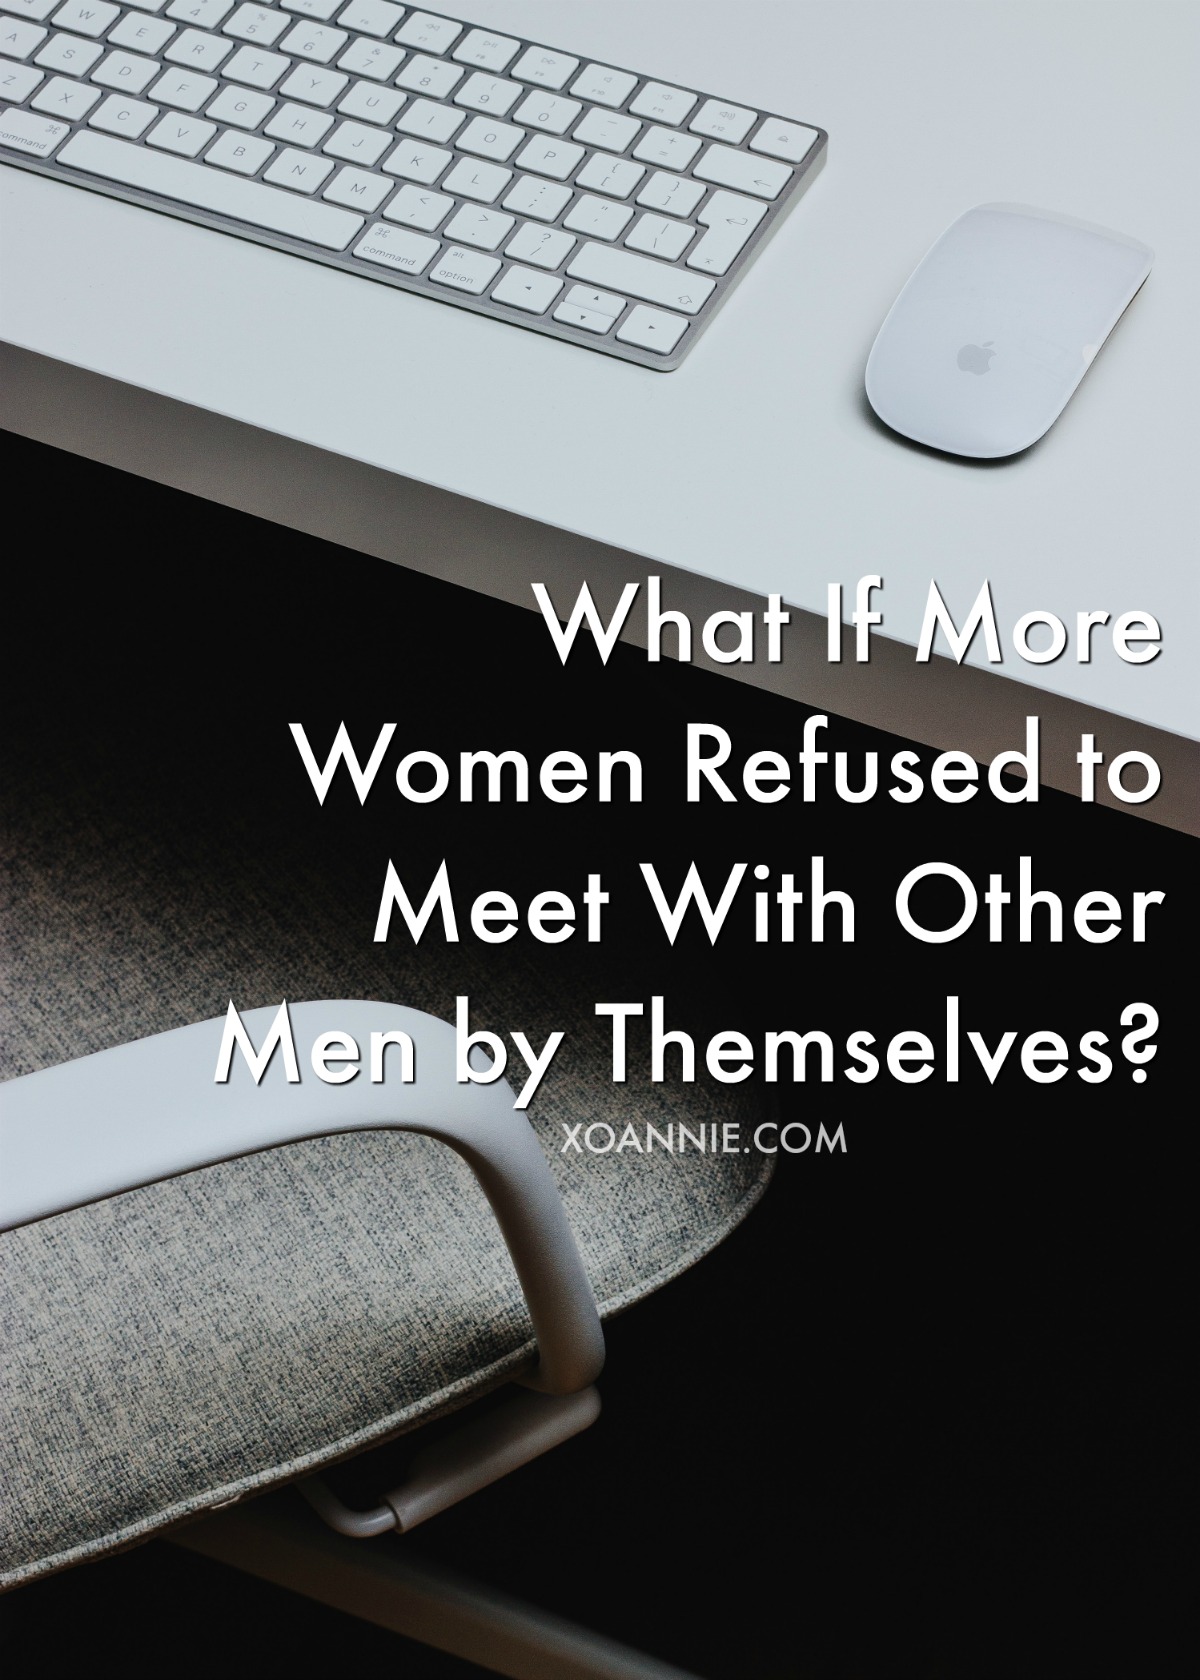 What If More Women Refused to Meet With Other Men by Themselves?